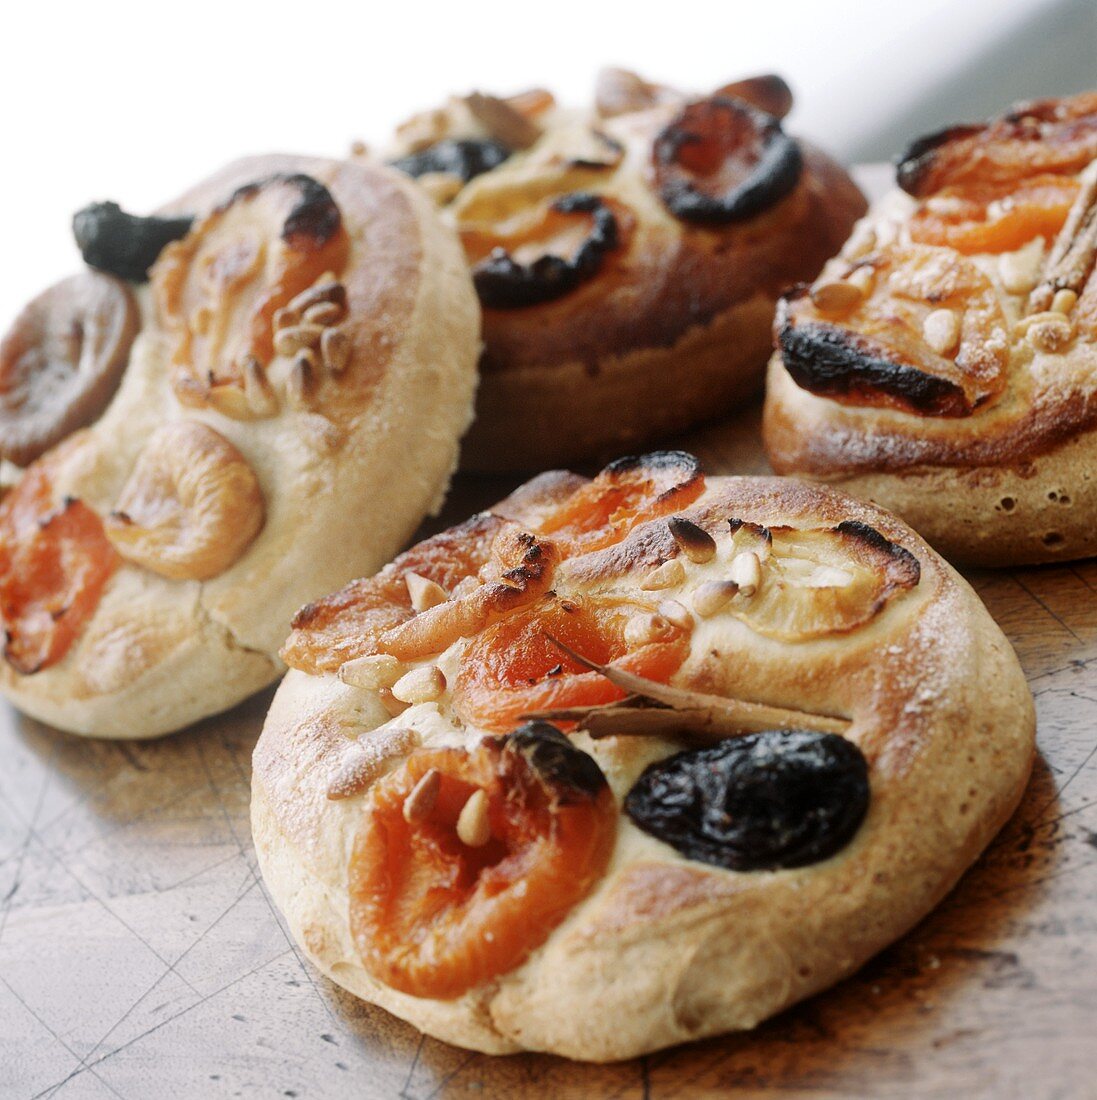 Sweet Pastries with Dried Fruits